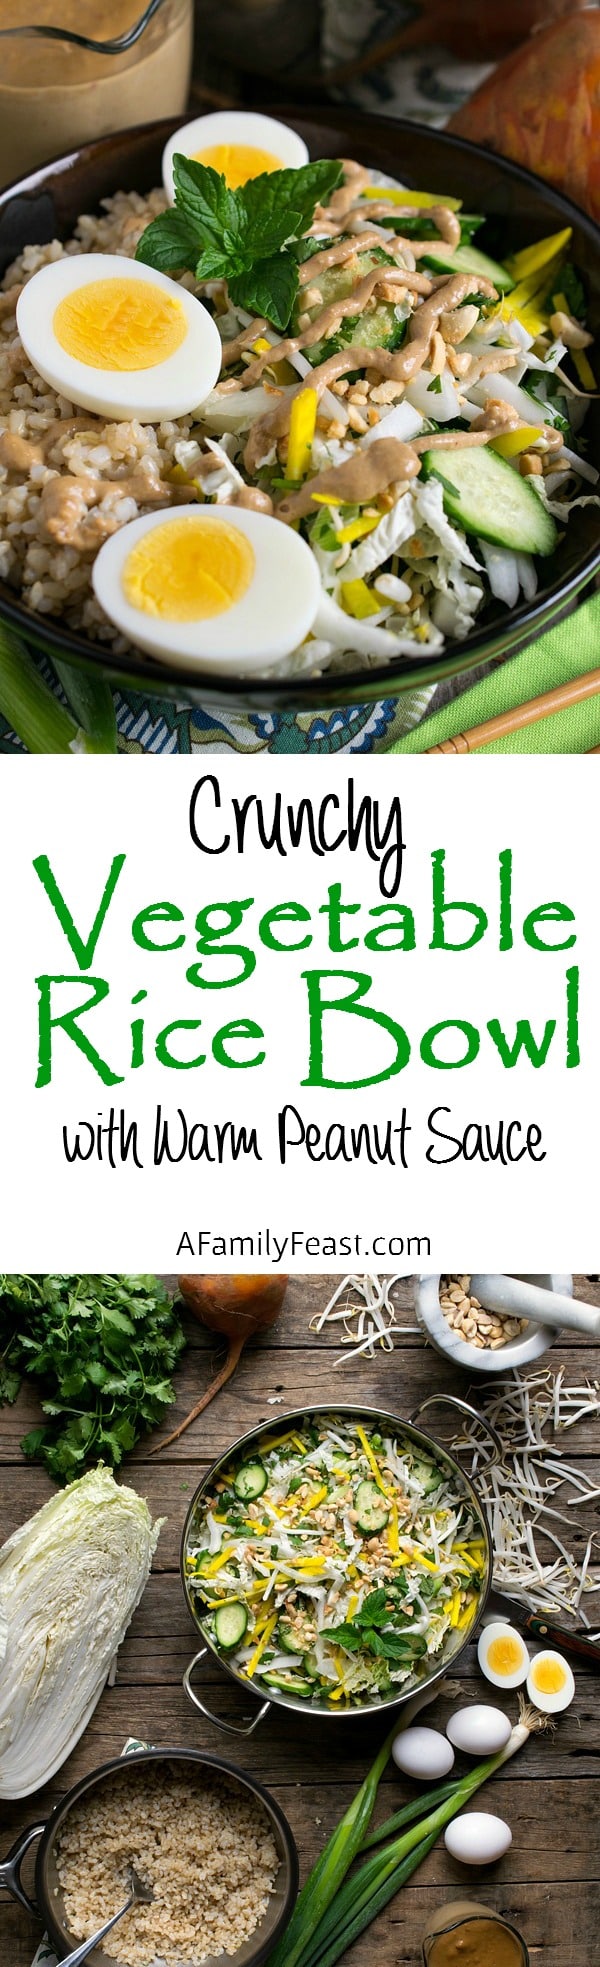 Crunchy Vegetable Rice Bowl with Warm Peanut Sauce - A healthy and delicious salad loaded with crisp vegetables, brown rice and a warm peanut sauce! Incredible!